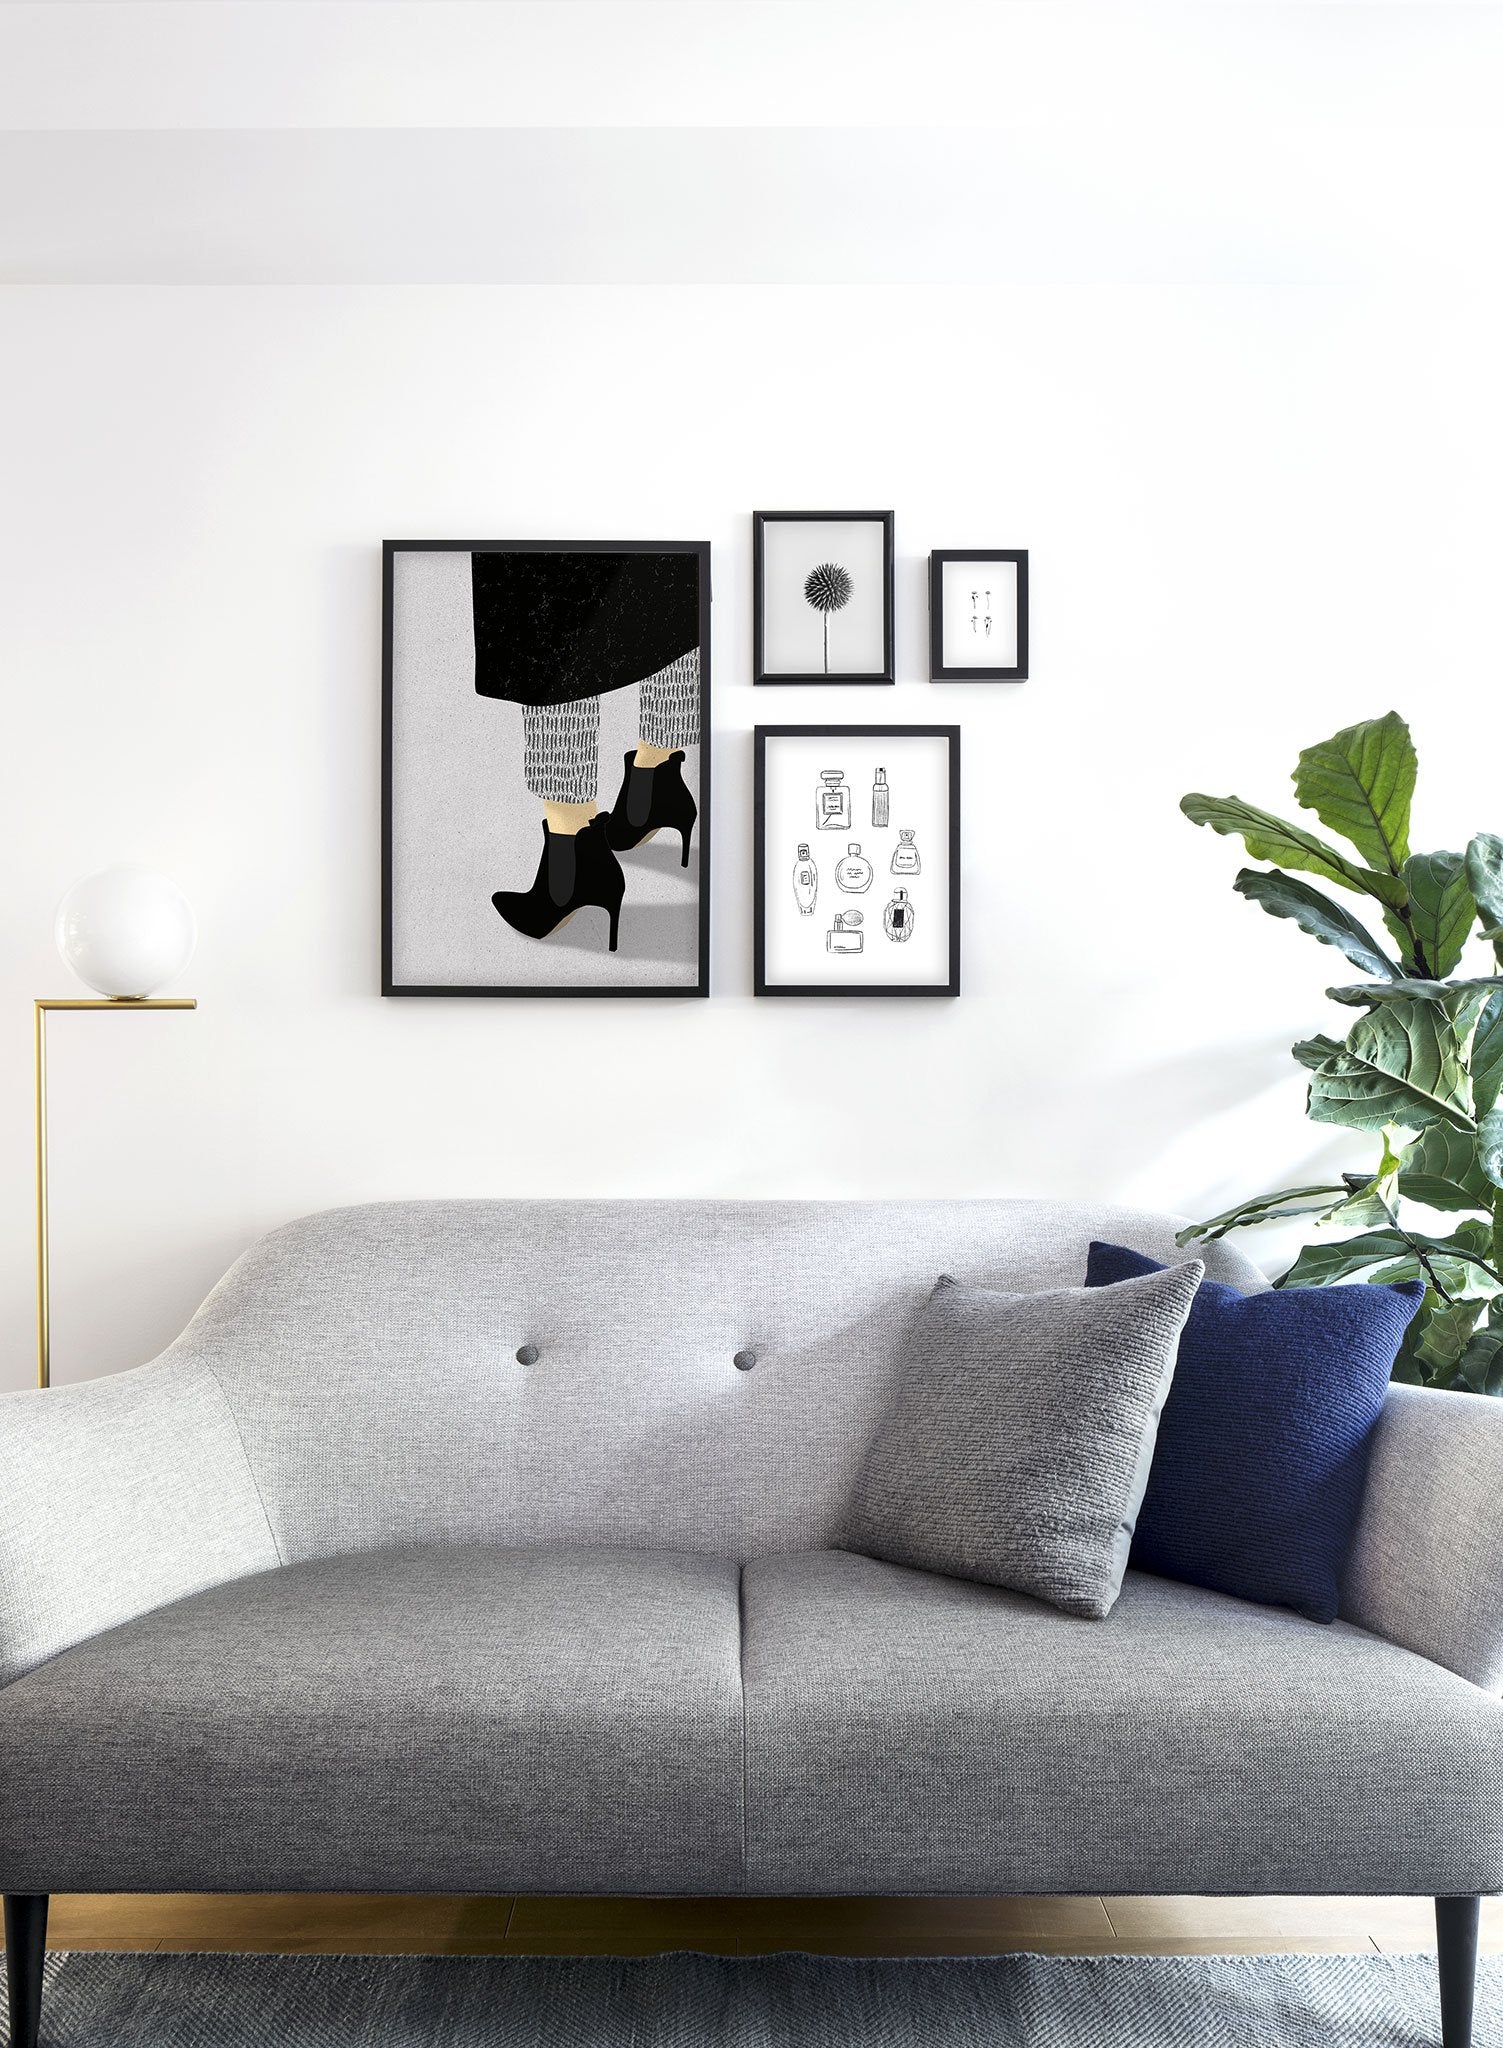 Fashion illustration poster by Opposite Wall with group of perfume bottles - Lifestyle Gallery - Living Room